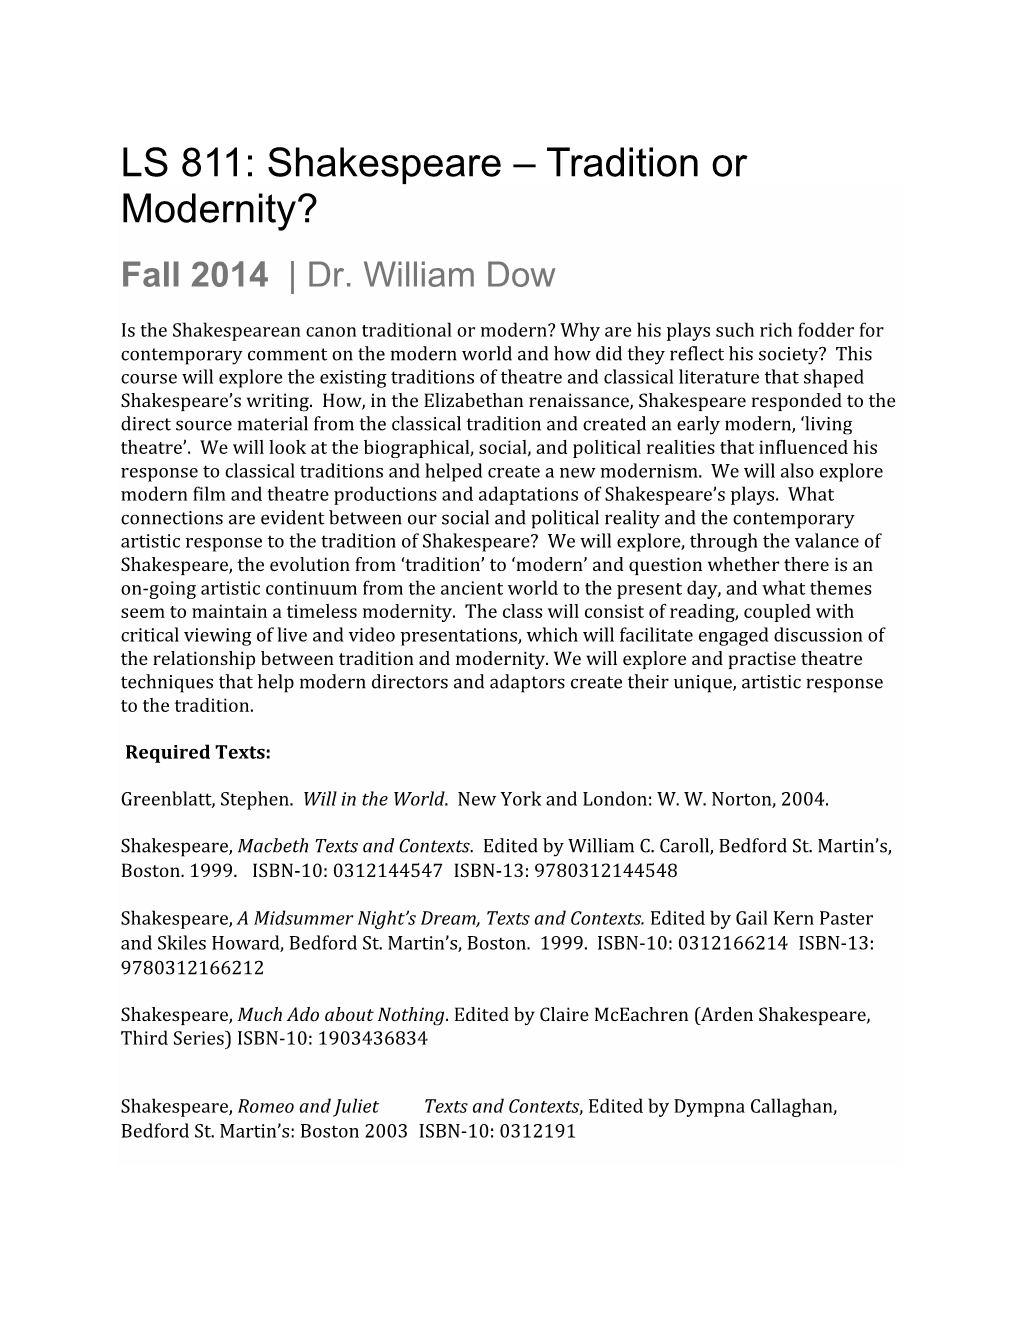 LS 811: Shakespeare – Tradition Or Modernity? Fall 2014 | Dr